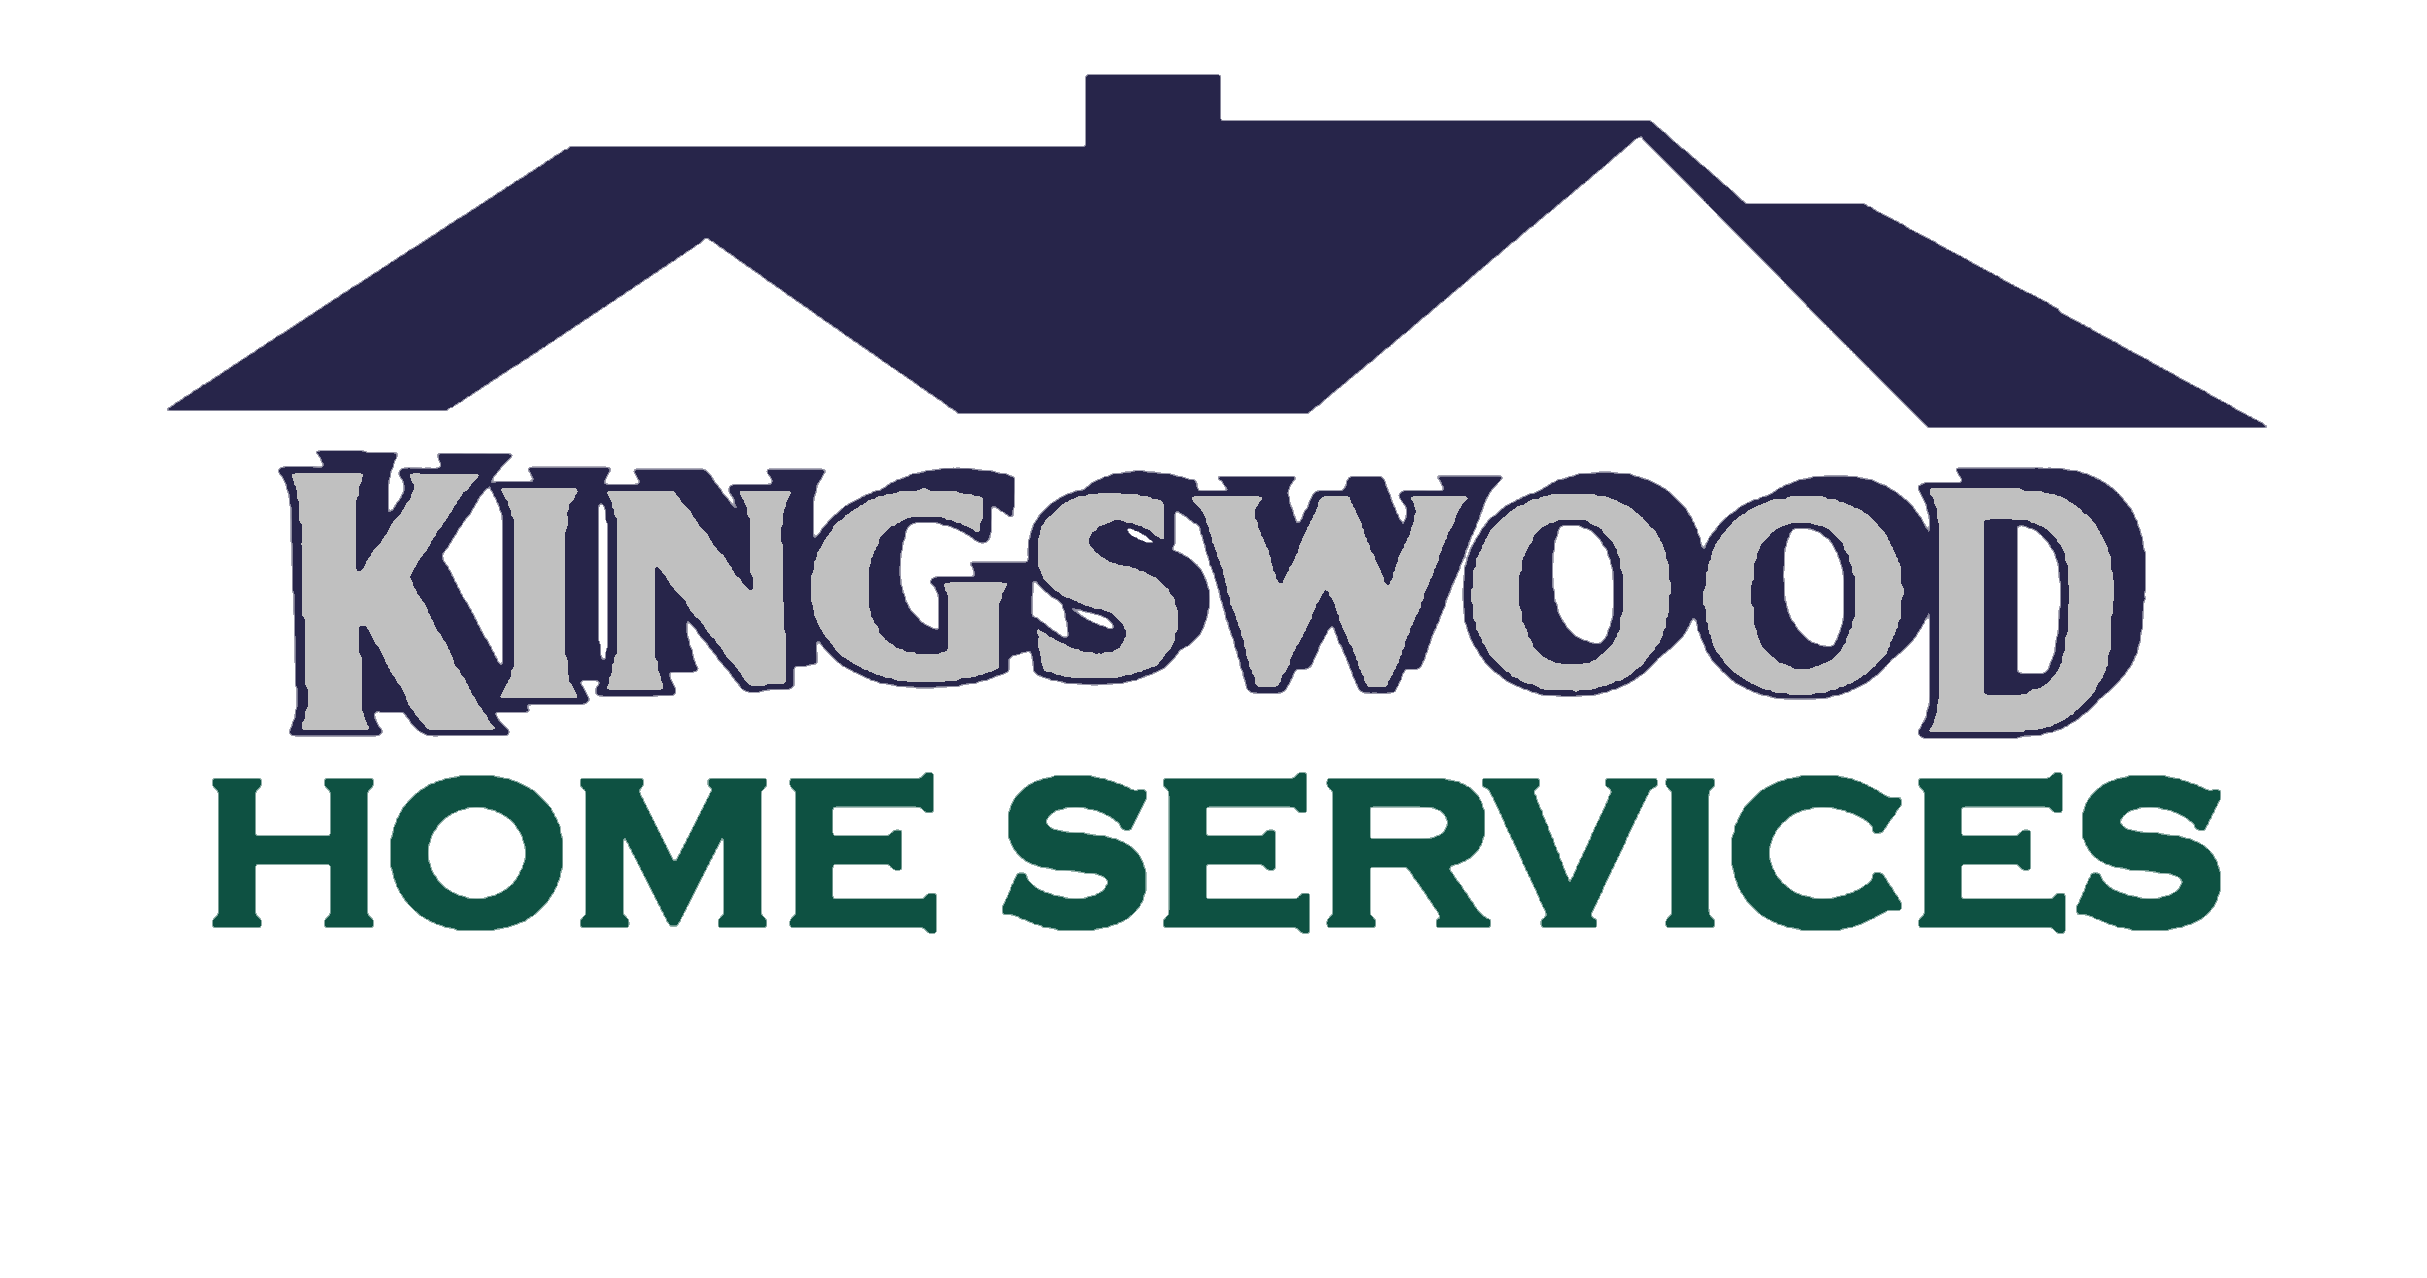 Kingswood Home Services